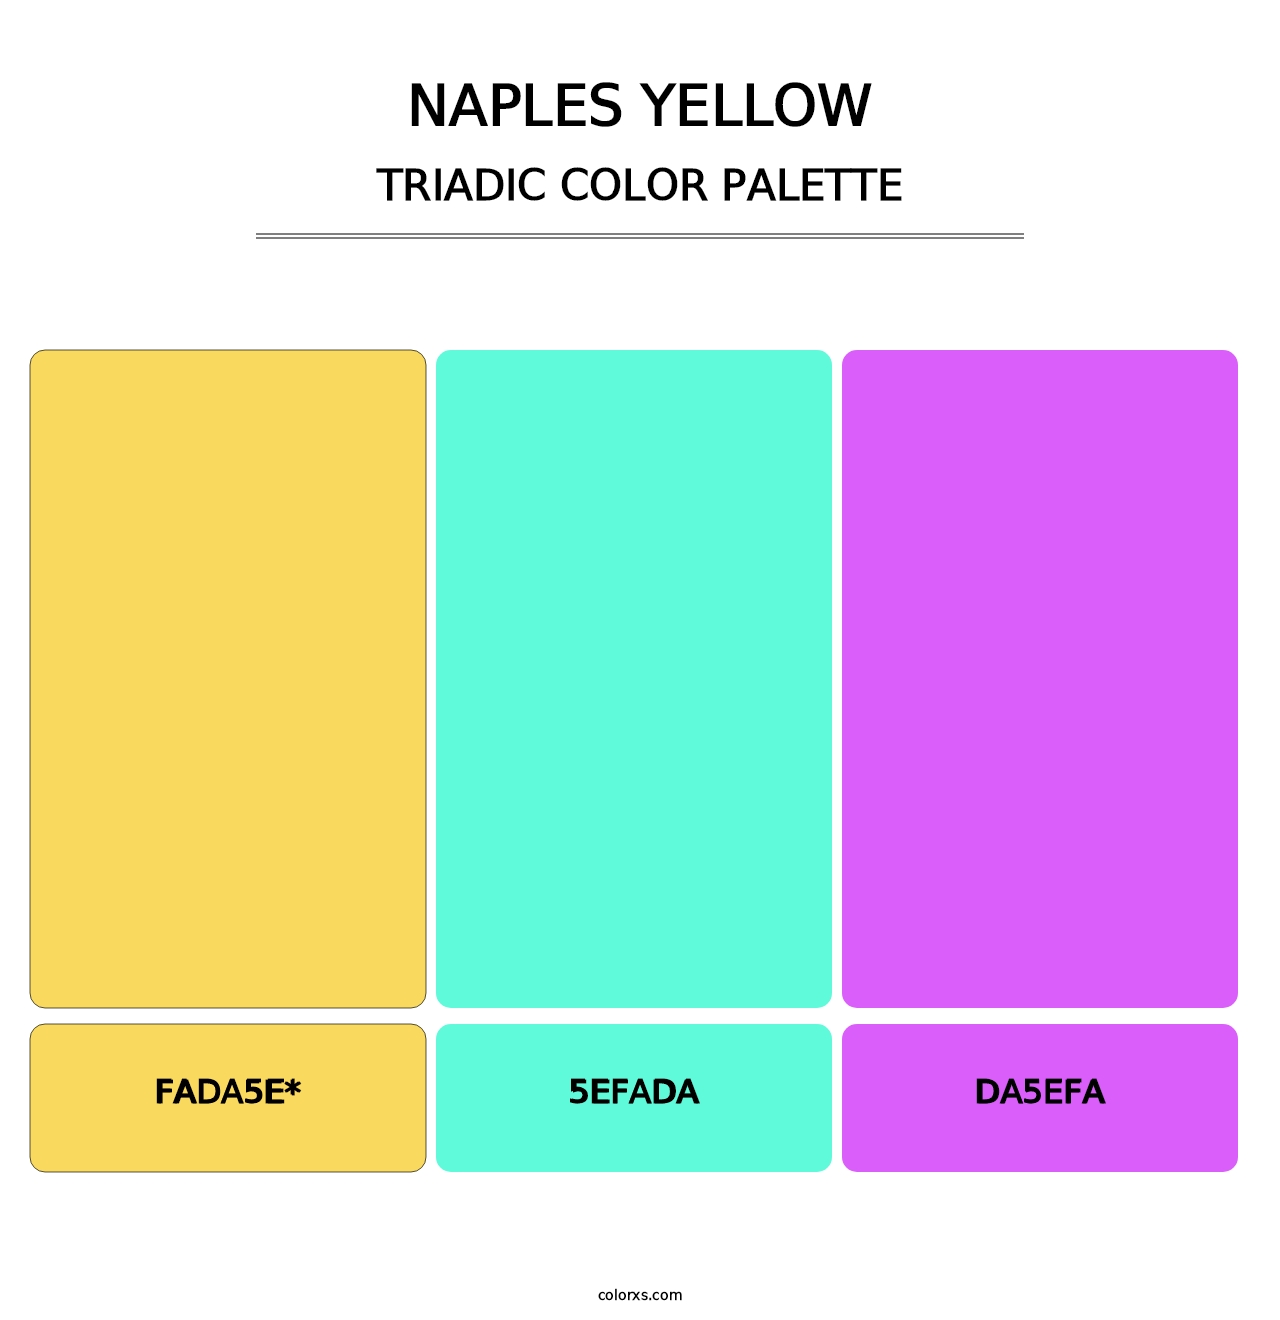 Naples Yellow - Triadic Color Palette